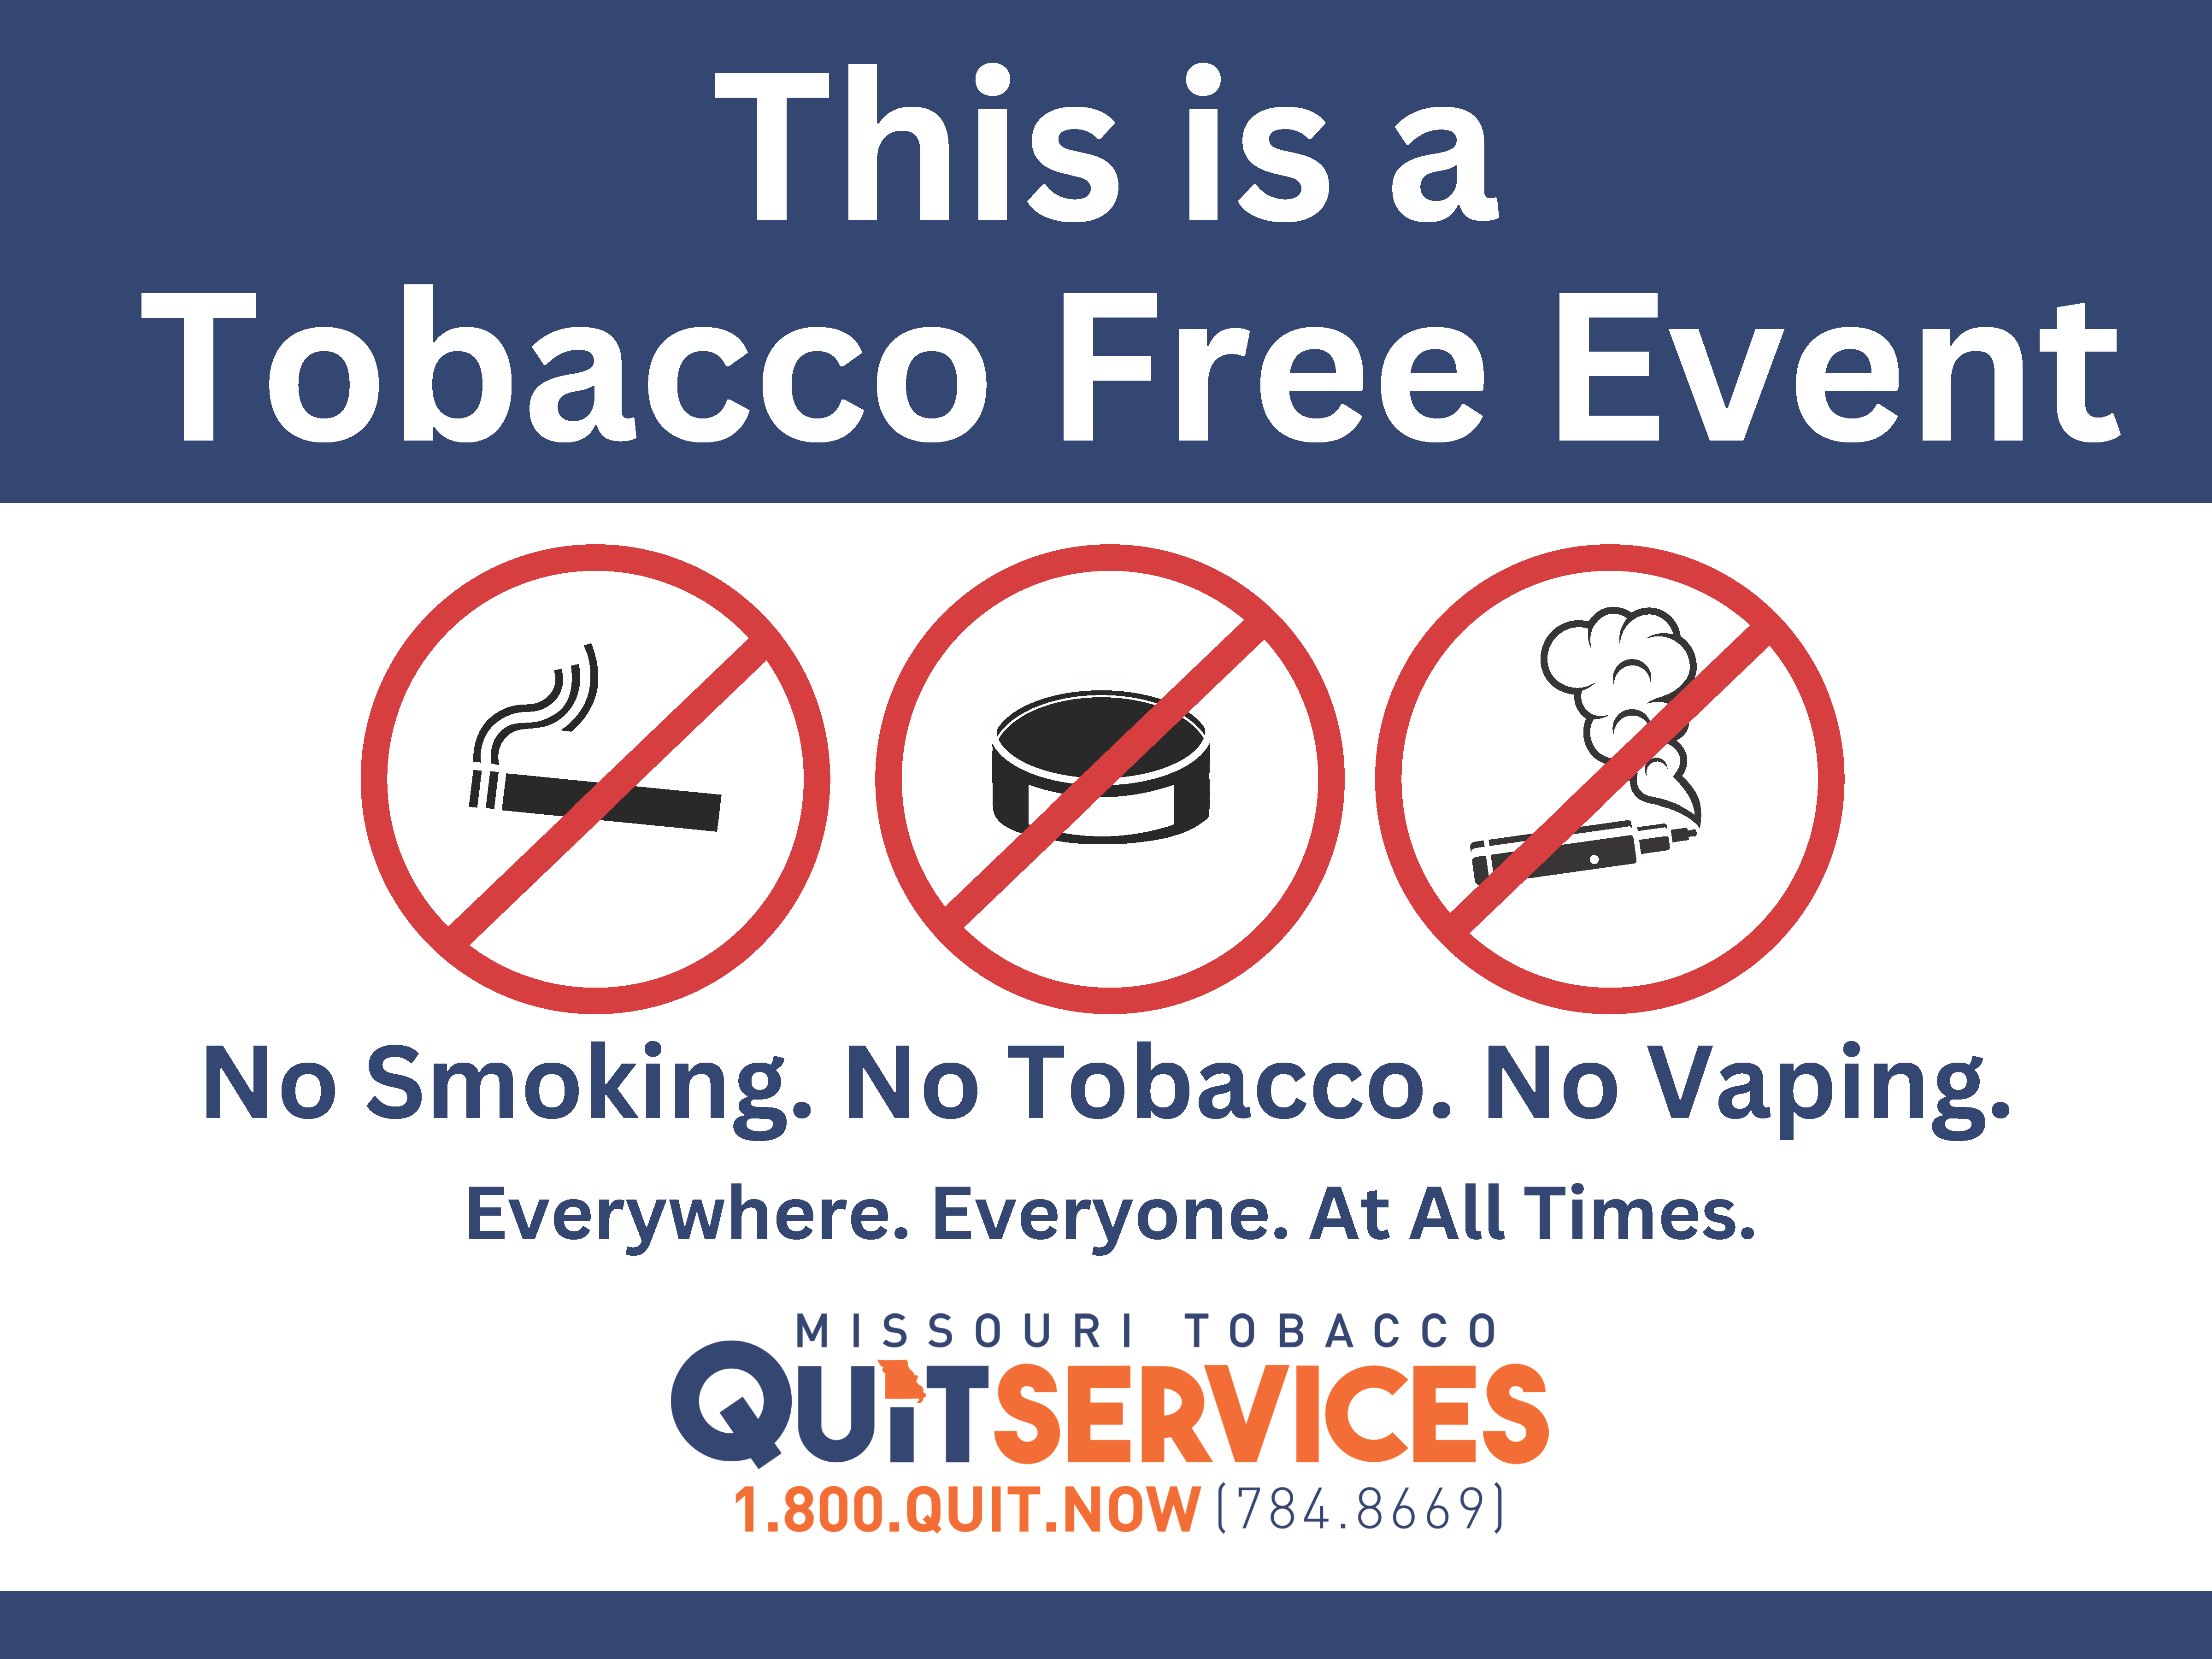 This is a tobacco free event resource